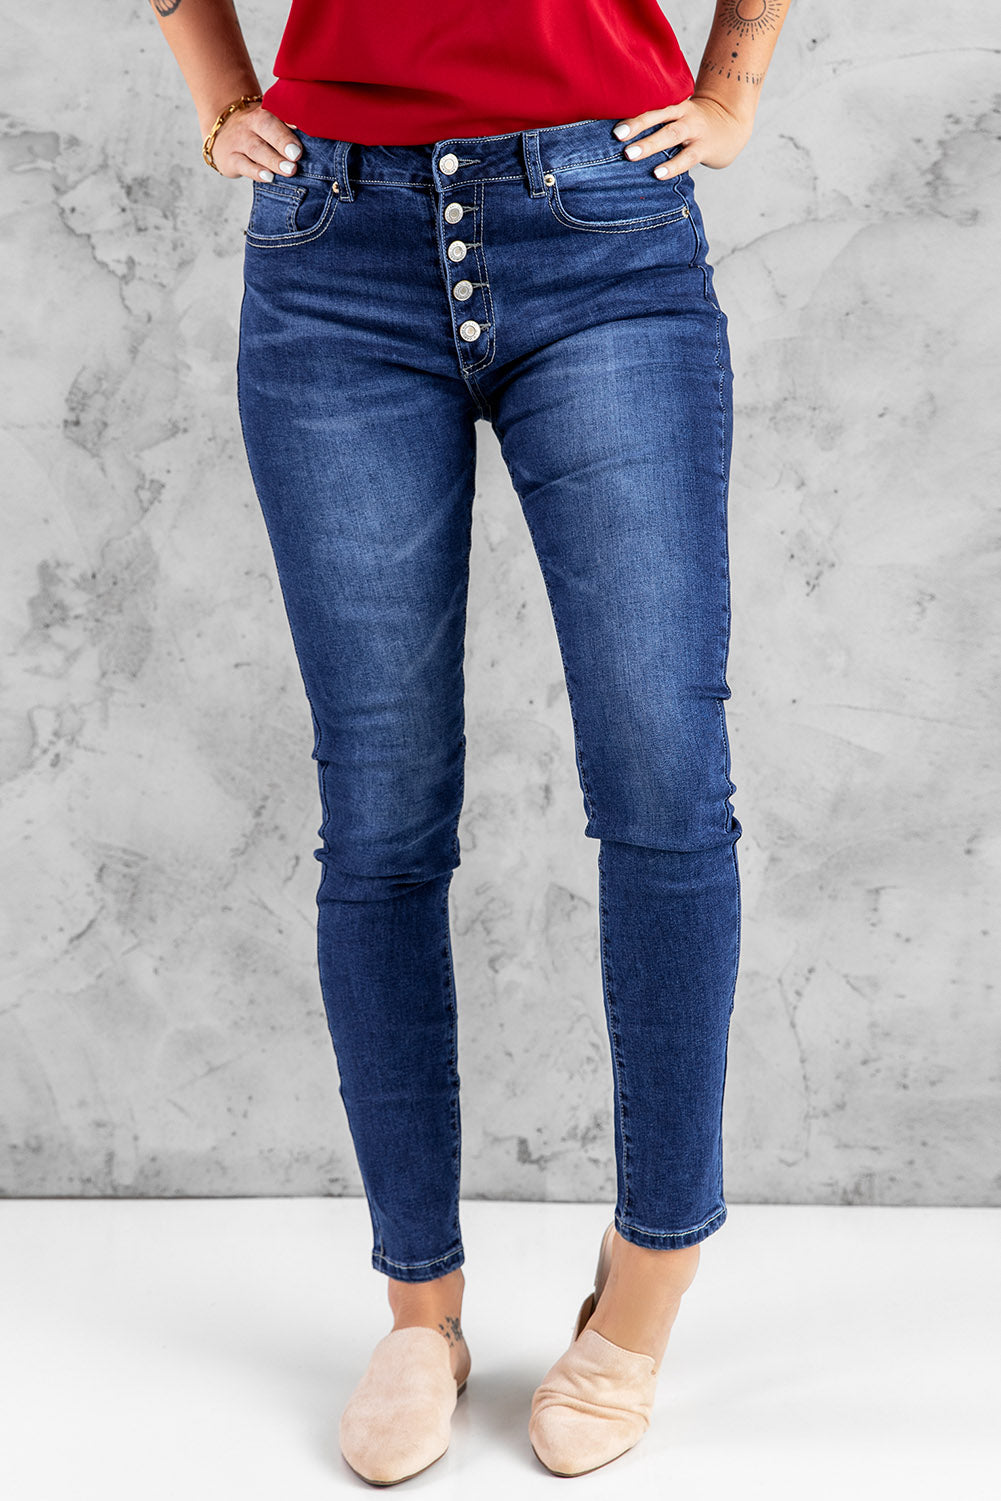 Blue High Rise Skinny Button Fly Jeans Blue 72%Cotton+26%Polyester+2%Elastane Jeans JT's Designer Fashion